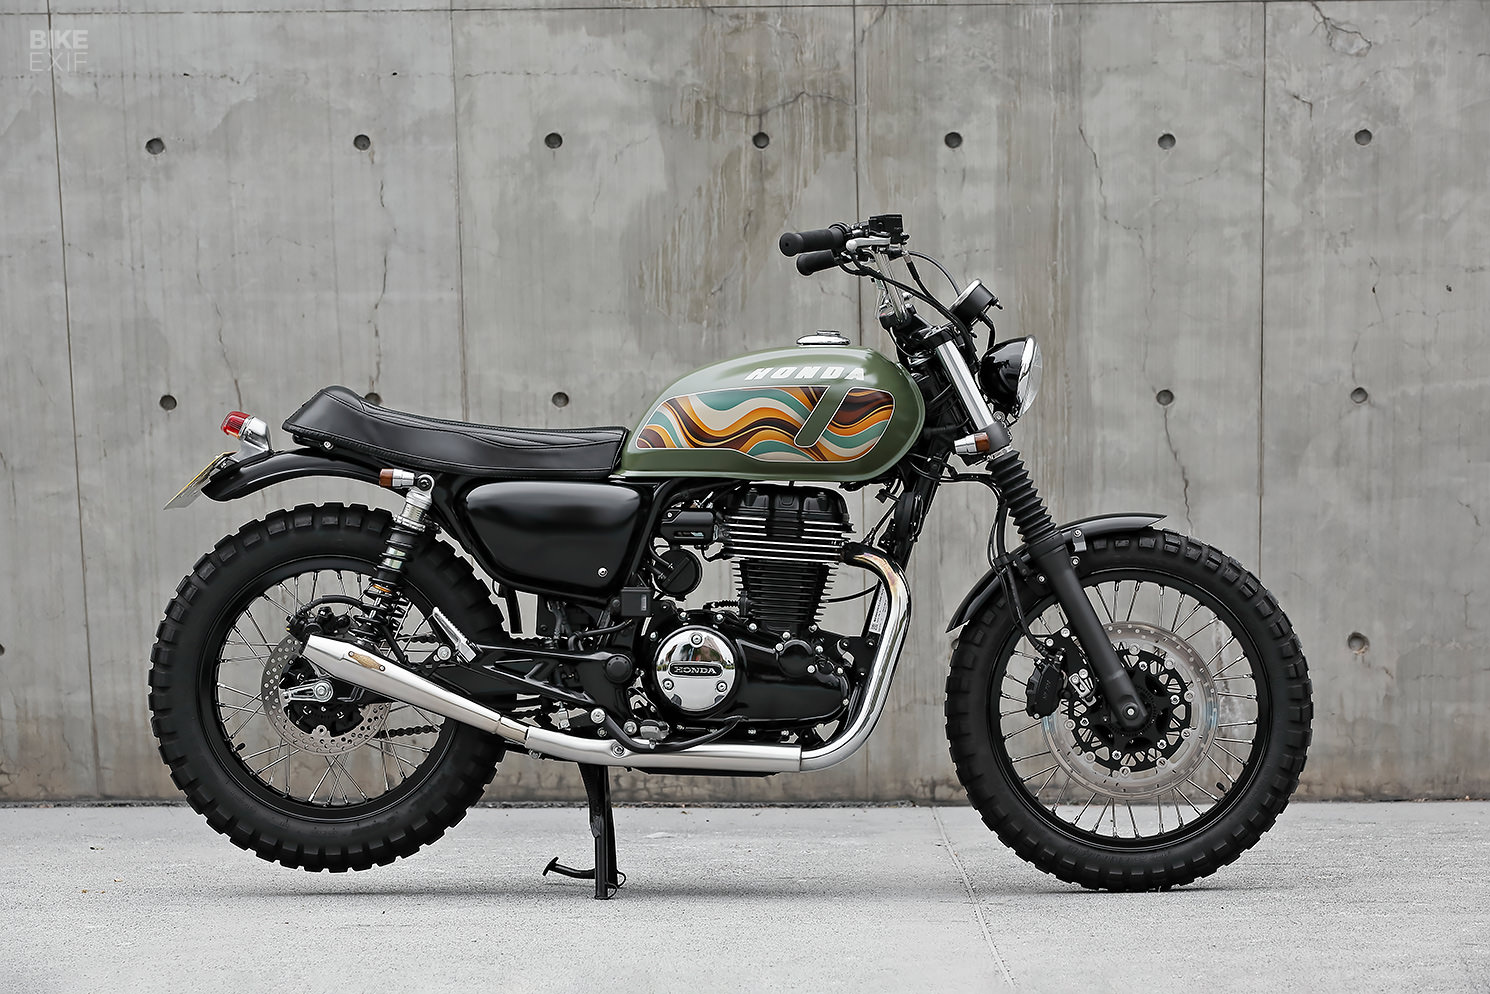 Grab-and-go: A custom kit for the Honda CB350 from Taiwan | Bike EXIF